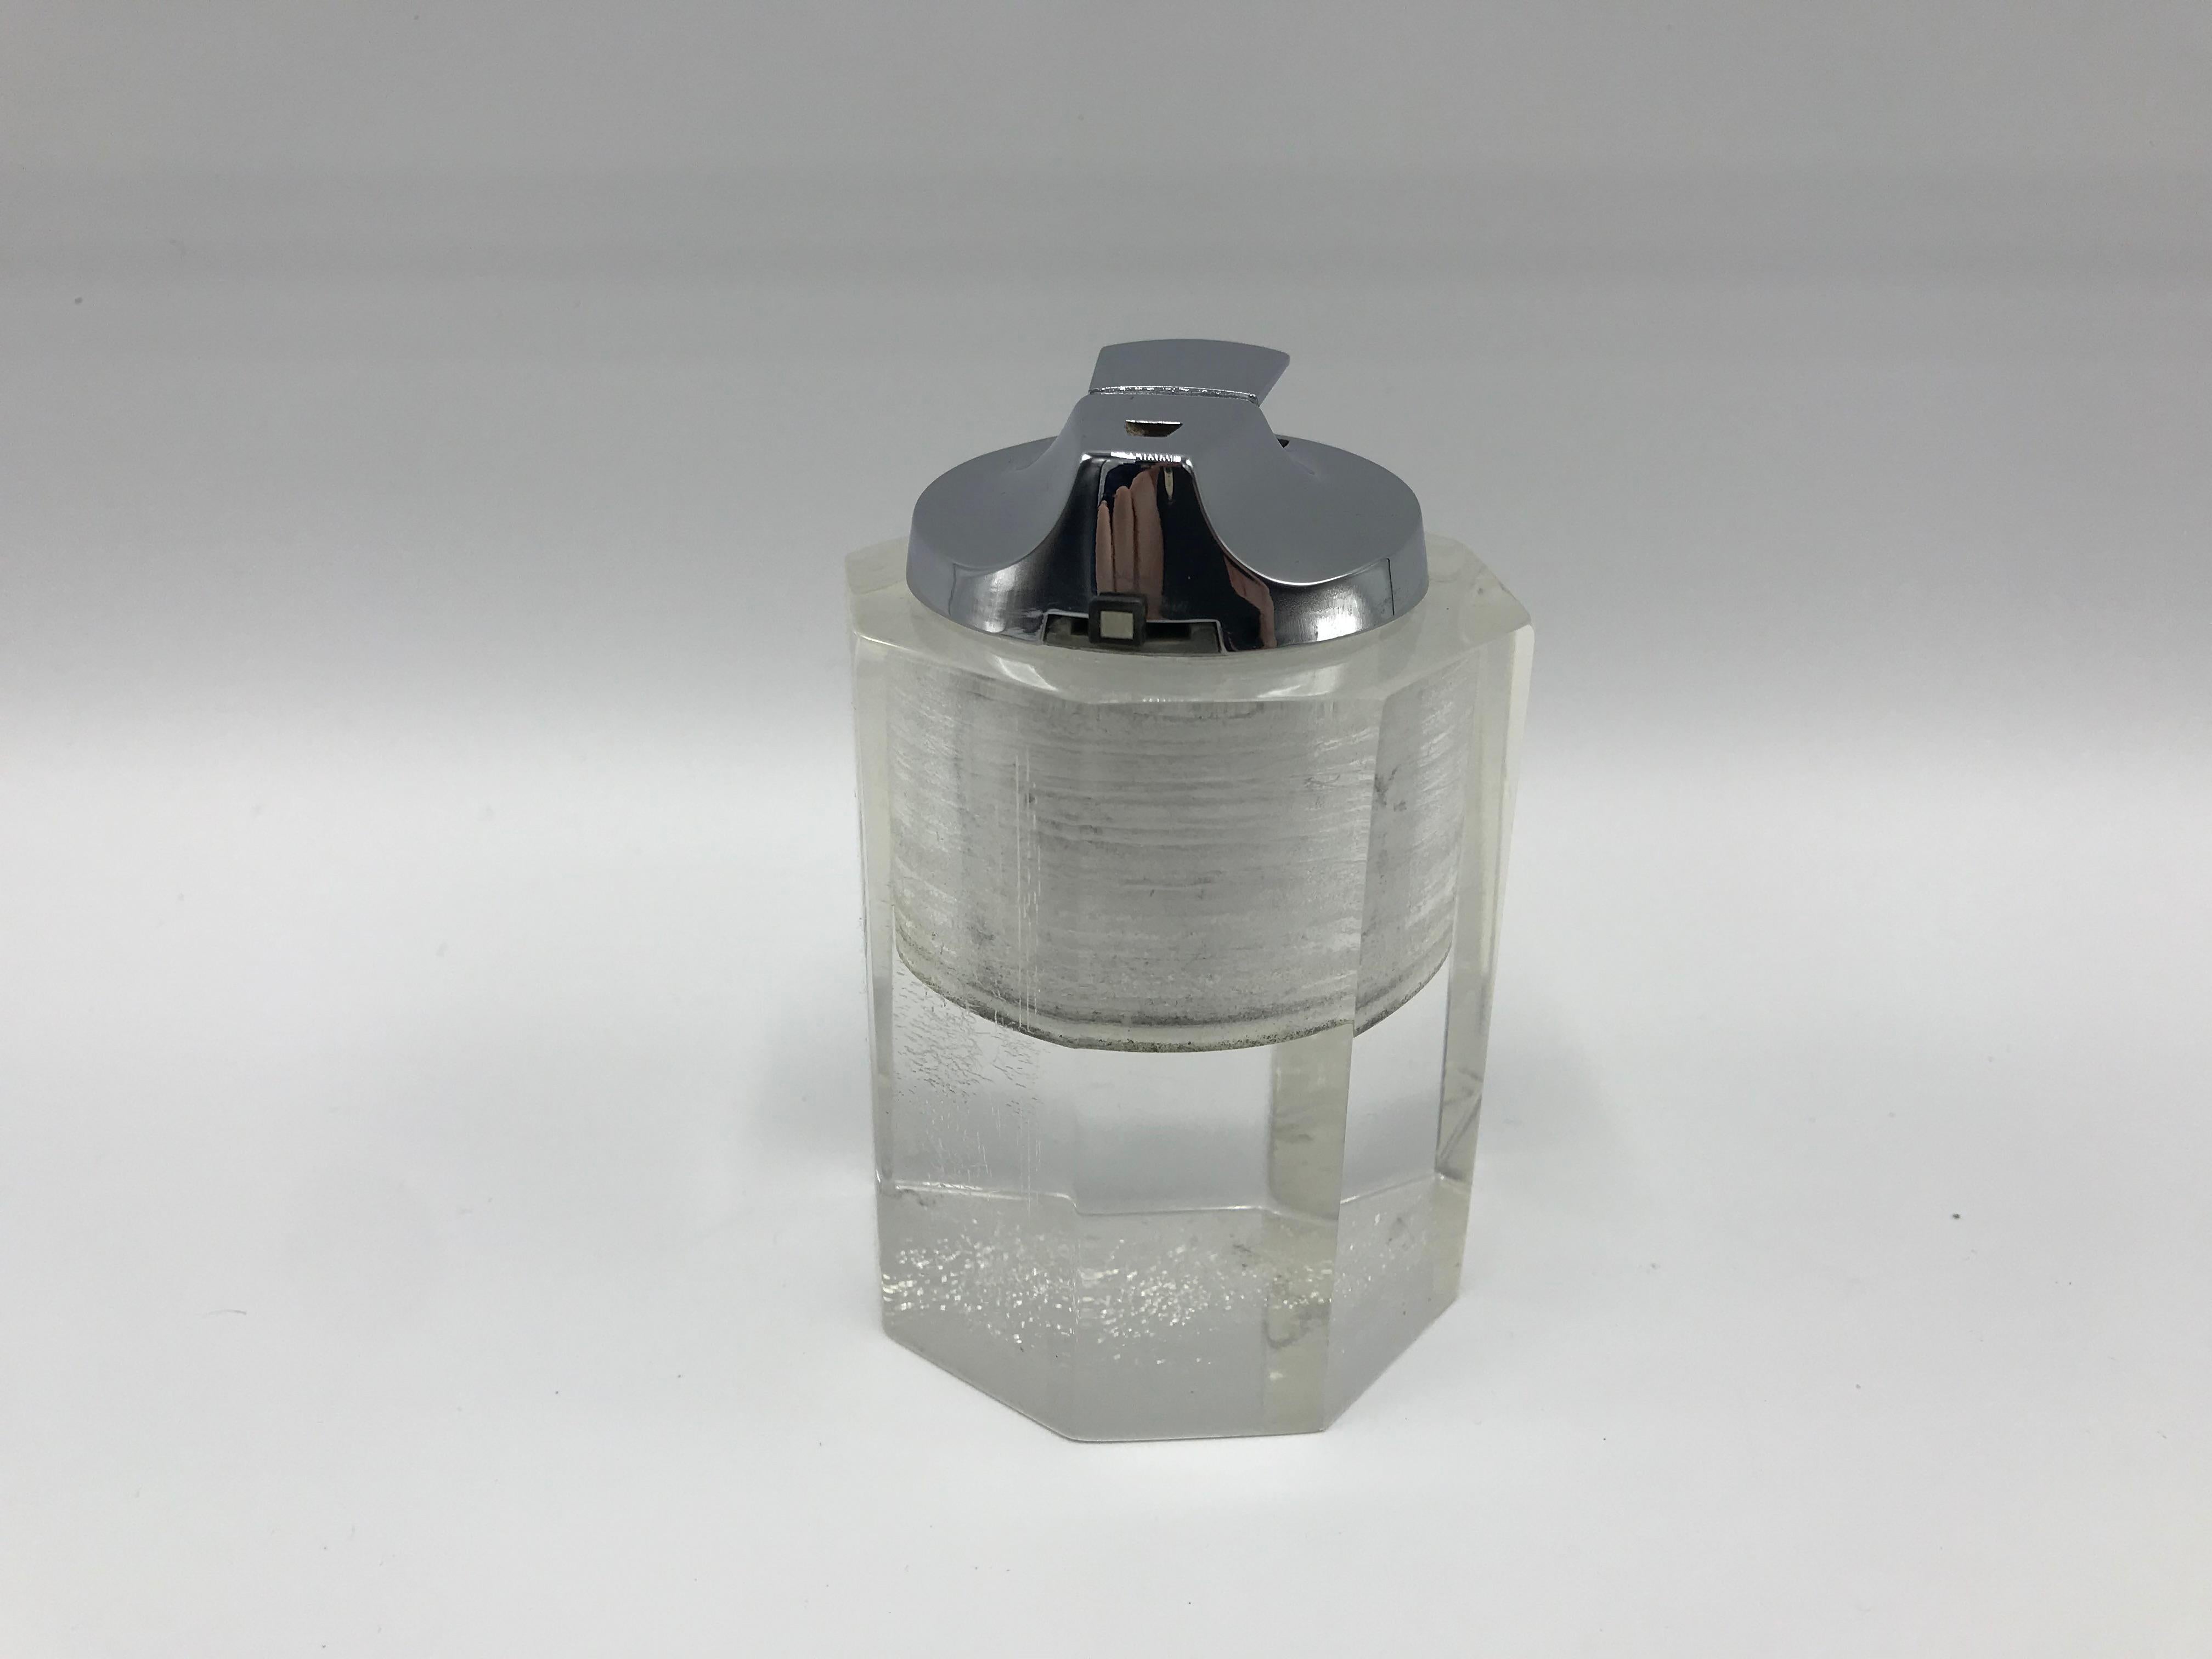 Offered is a beautiful, 1980s Lucite and chrome octagon shaped lighter. The chrome lighter mechanism is removable for easy lighter-fluid refilling. Heavy.